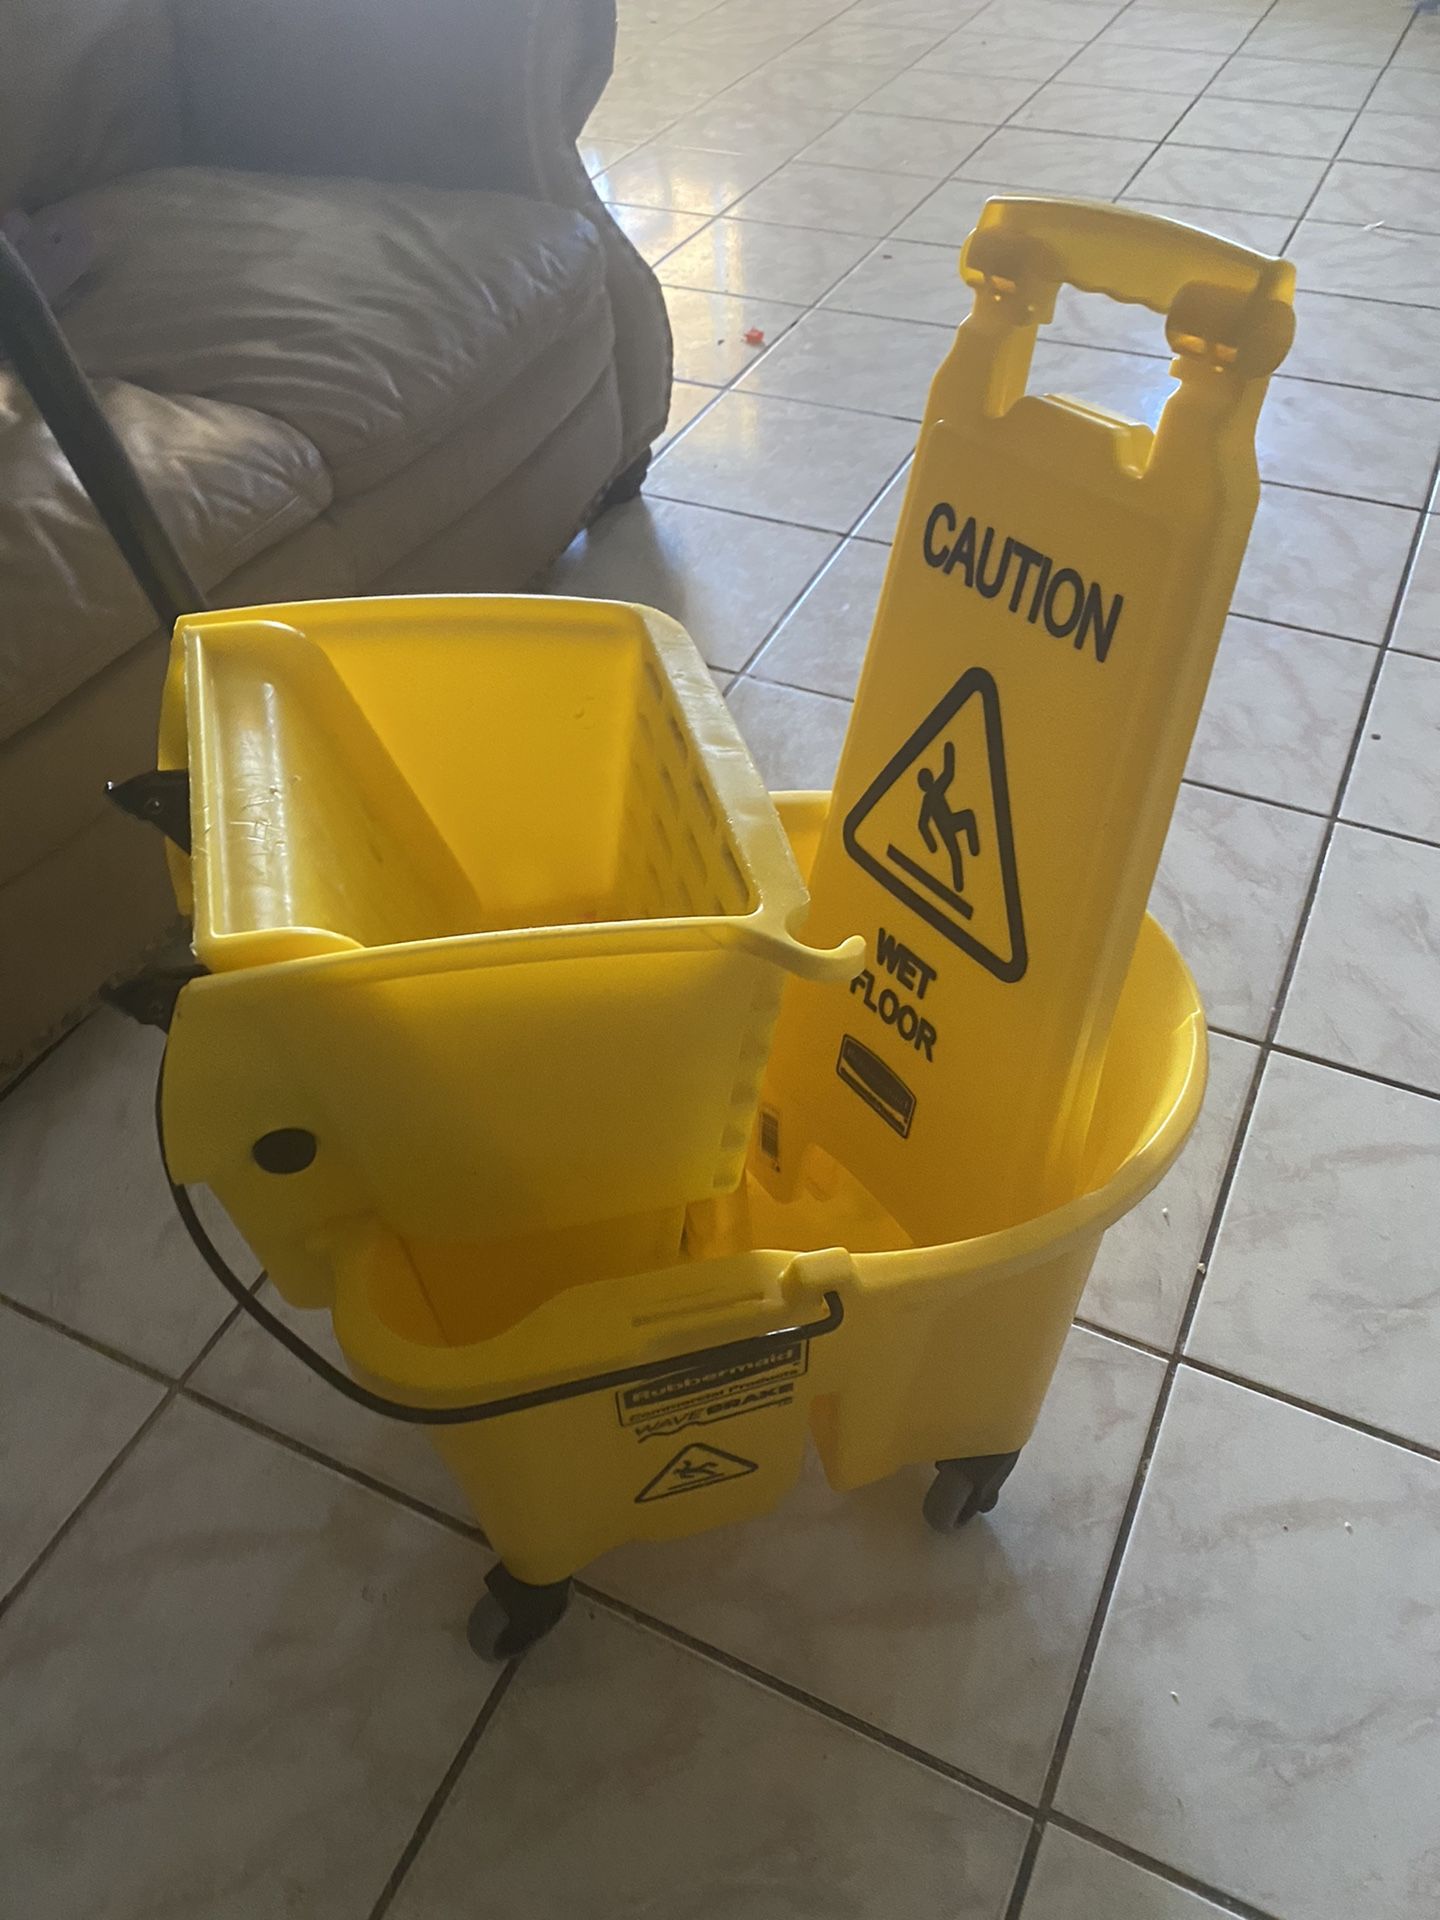 Mop bucket with sign